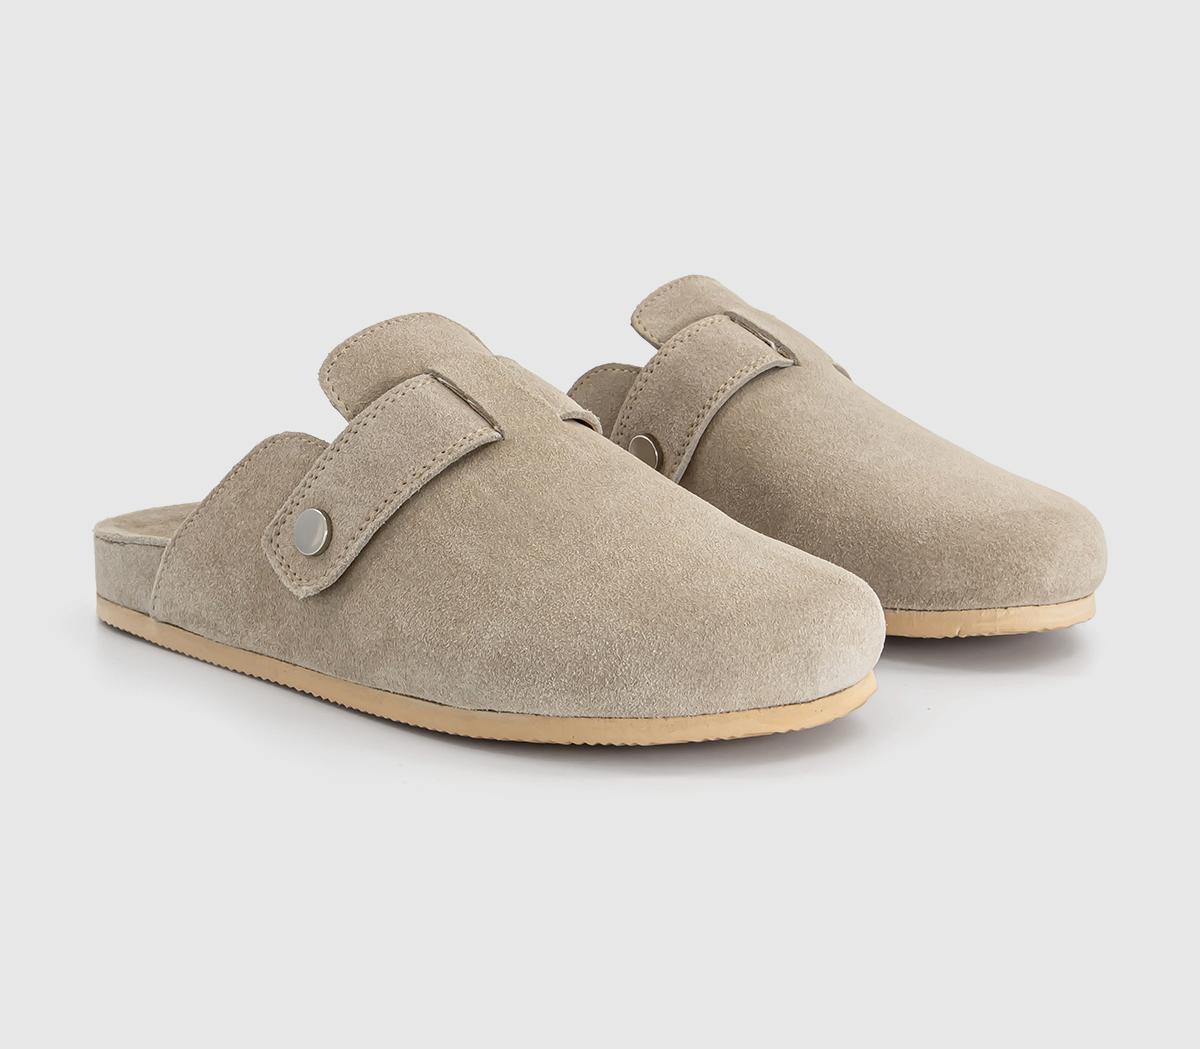 OFFICE Womens Star Buckle Detail Slip On Clogs Taupe Suede Grey, 7